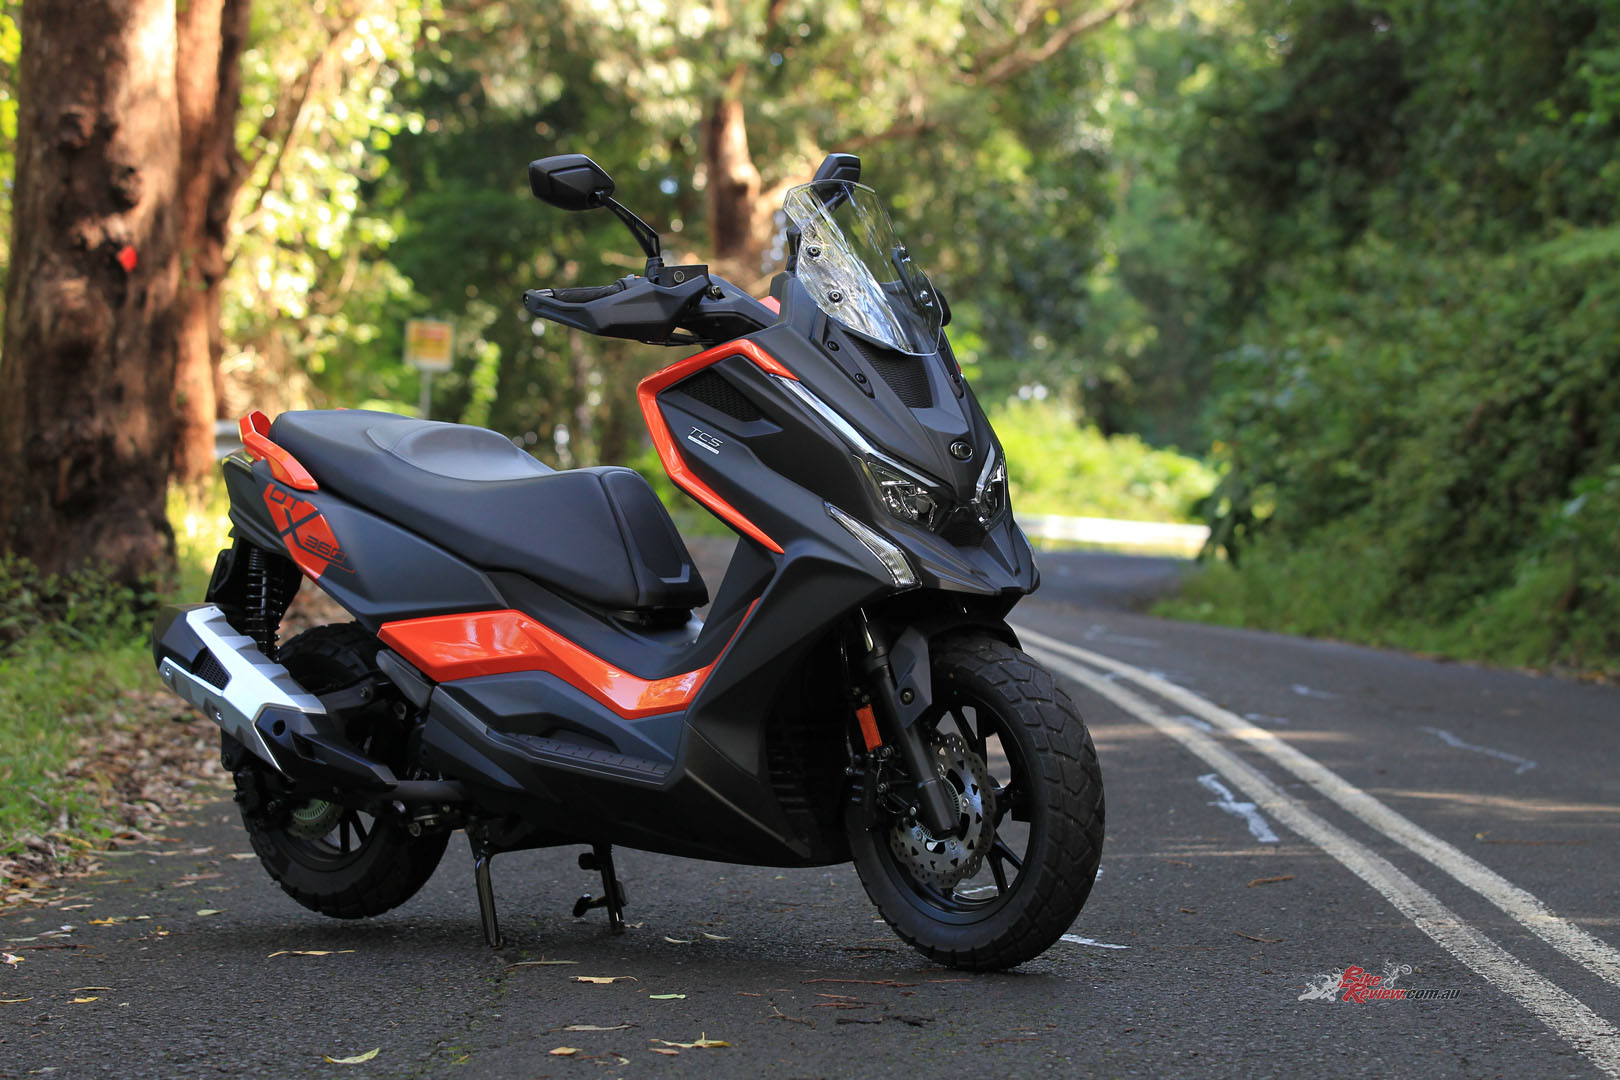 KYMCO have attempted something new in the scooter market, something they're calling an adventure crossover scooter...